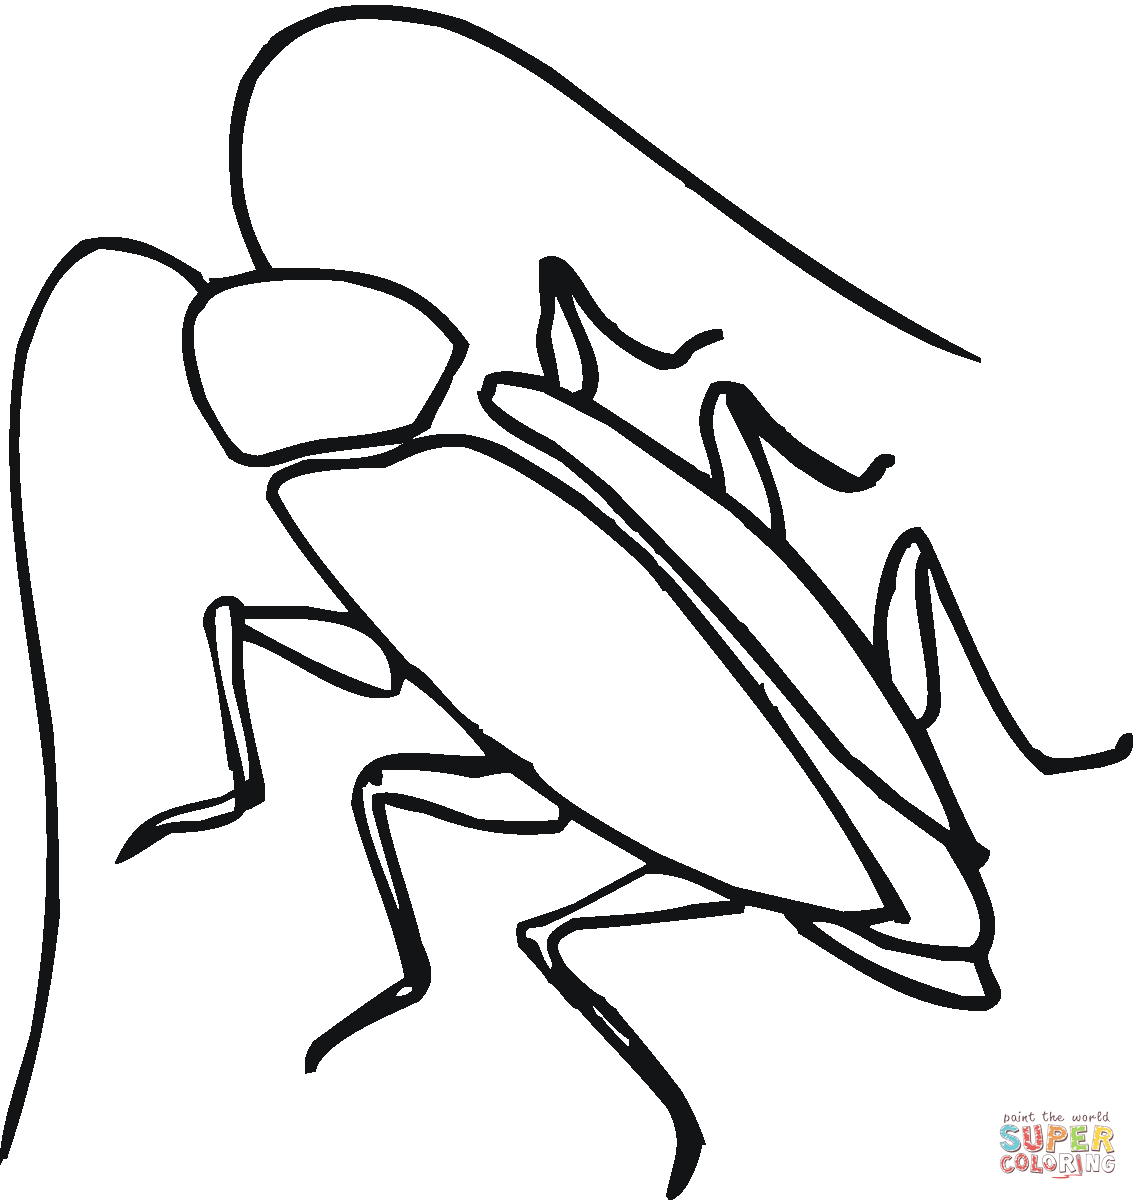 Cockroach coloring #19, Download drawings